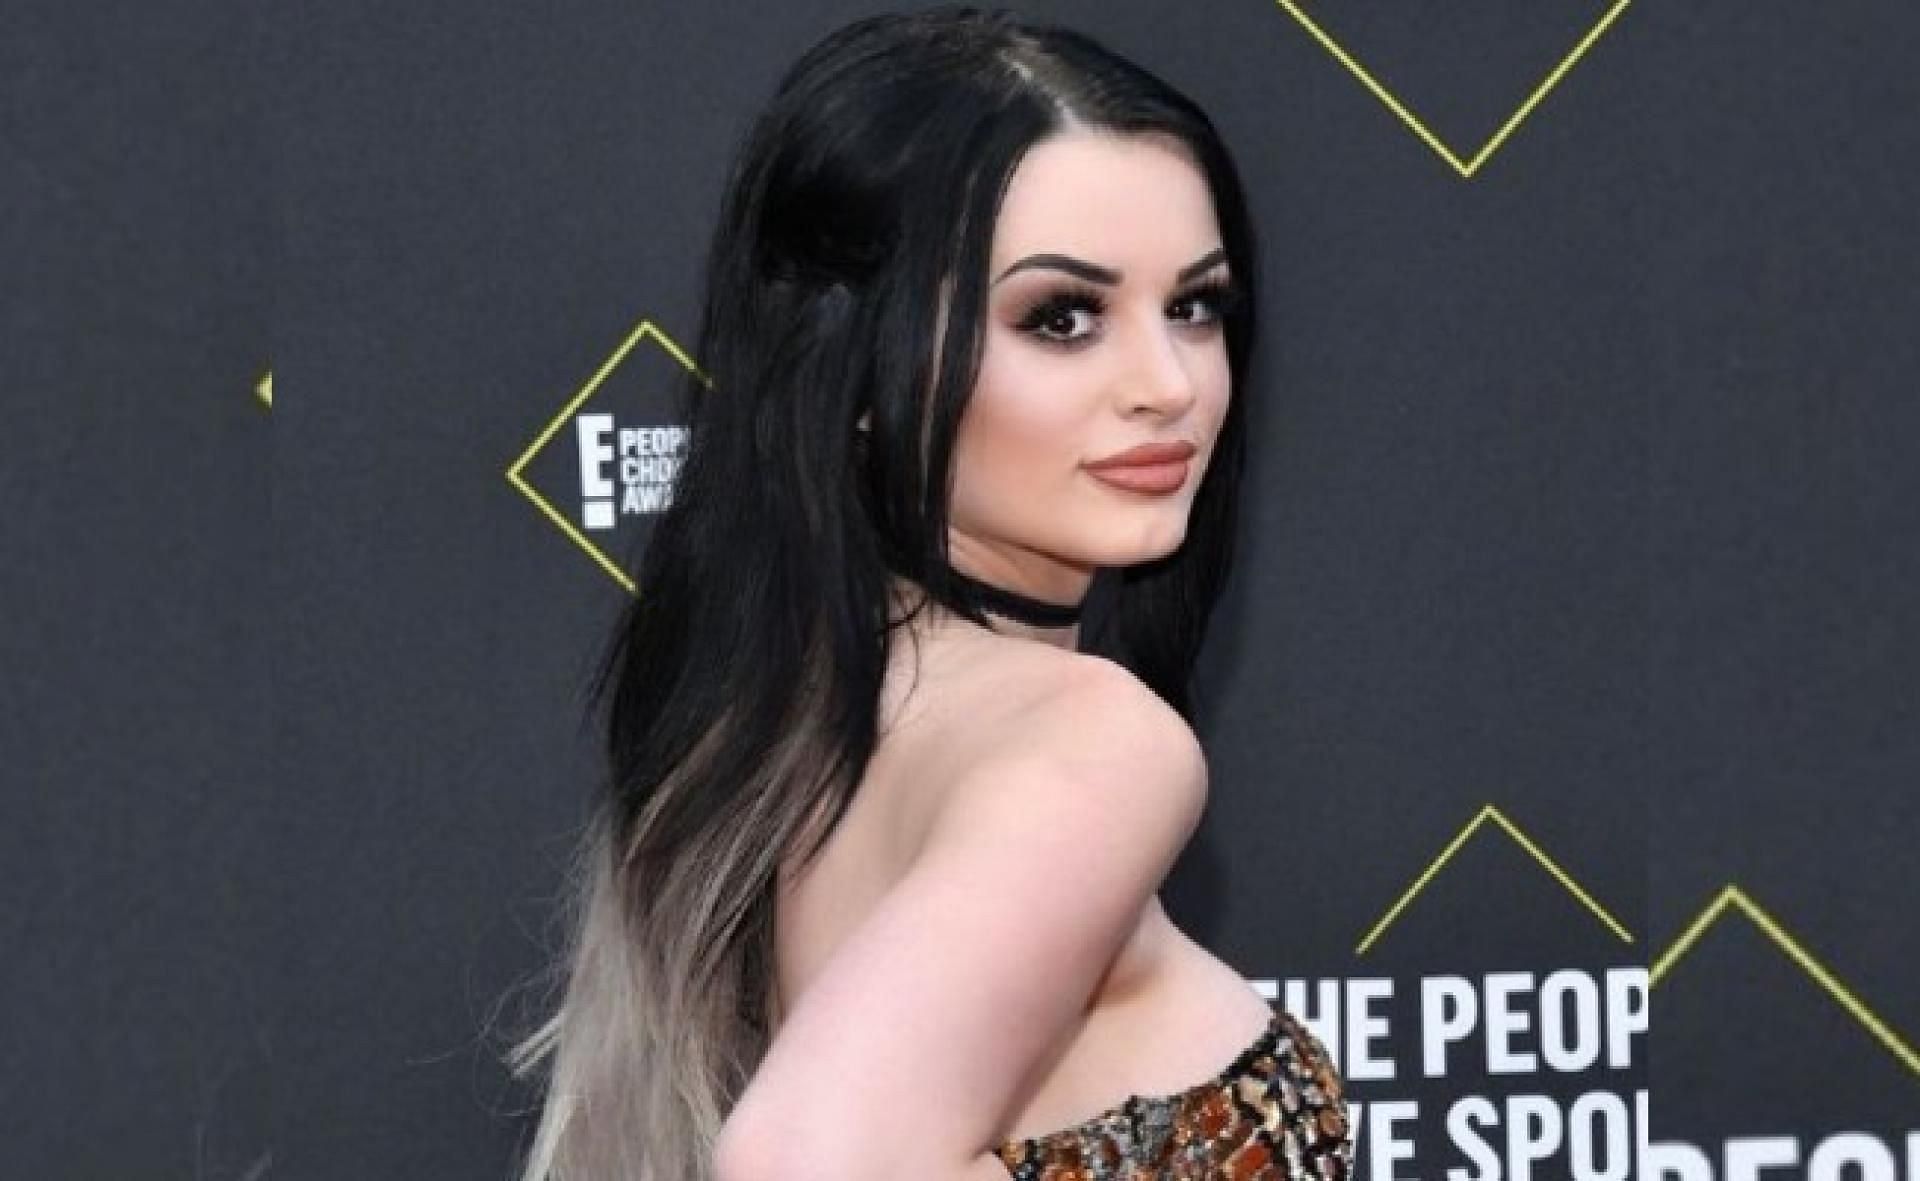 Will Paige head to Hollywood after her wrestling career is over?